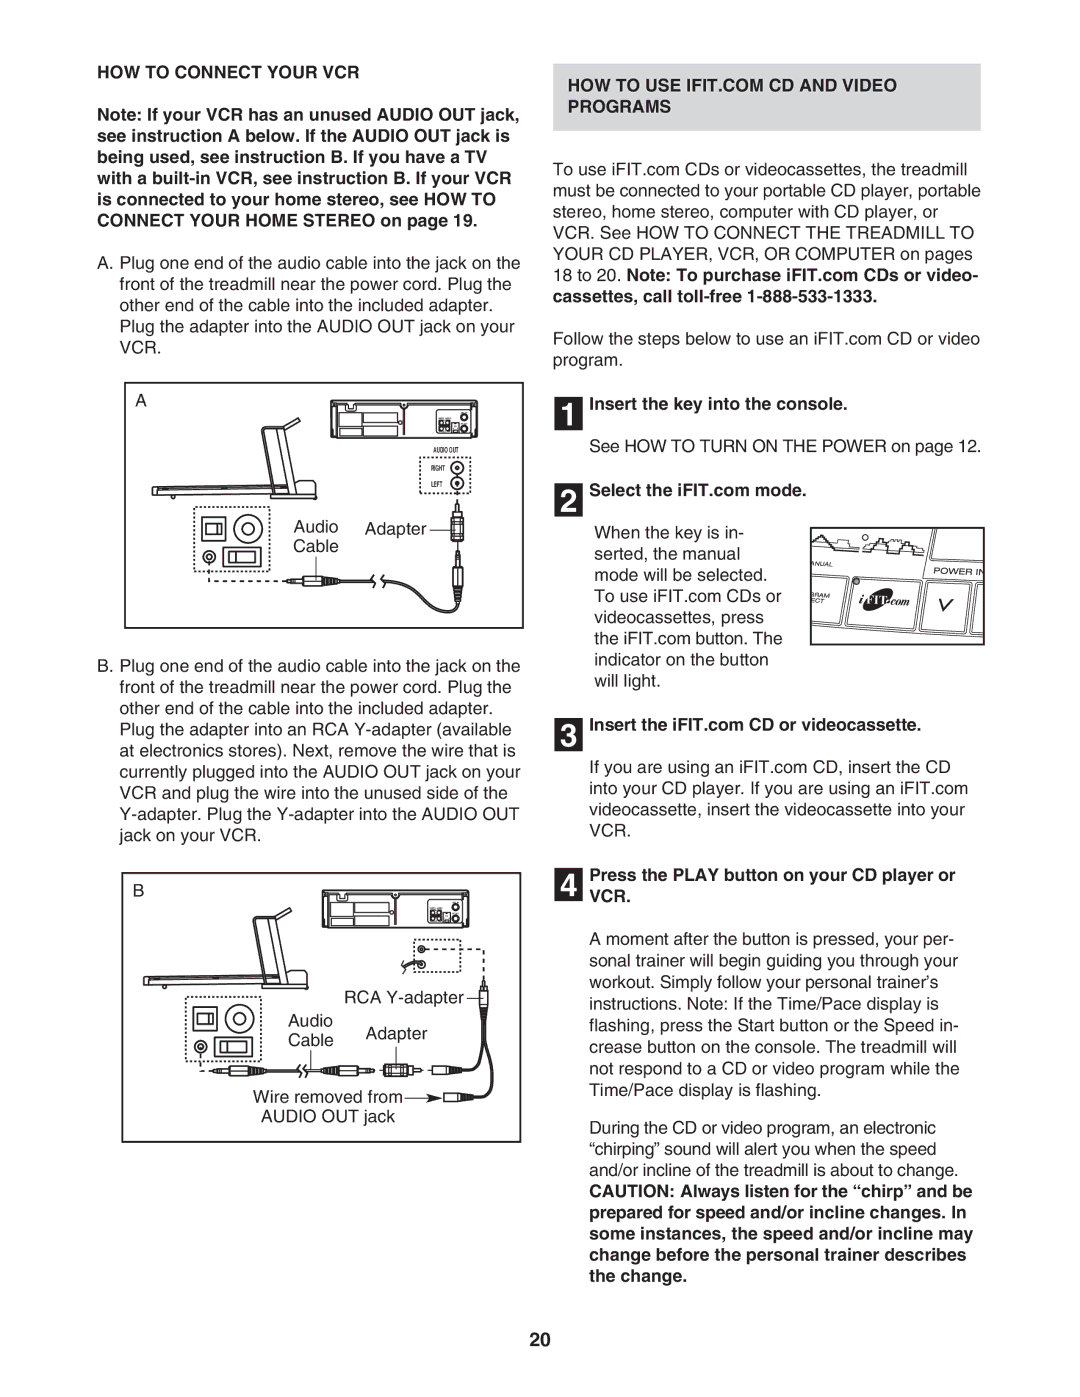 ProForm PFTL591040 user manual HOW to Connect Your VCR, Audio Adapter Cable, Insert the key into the console 